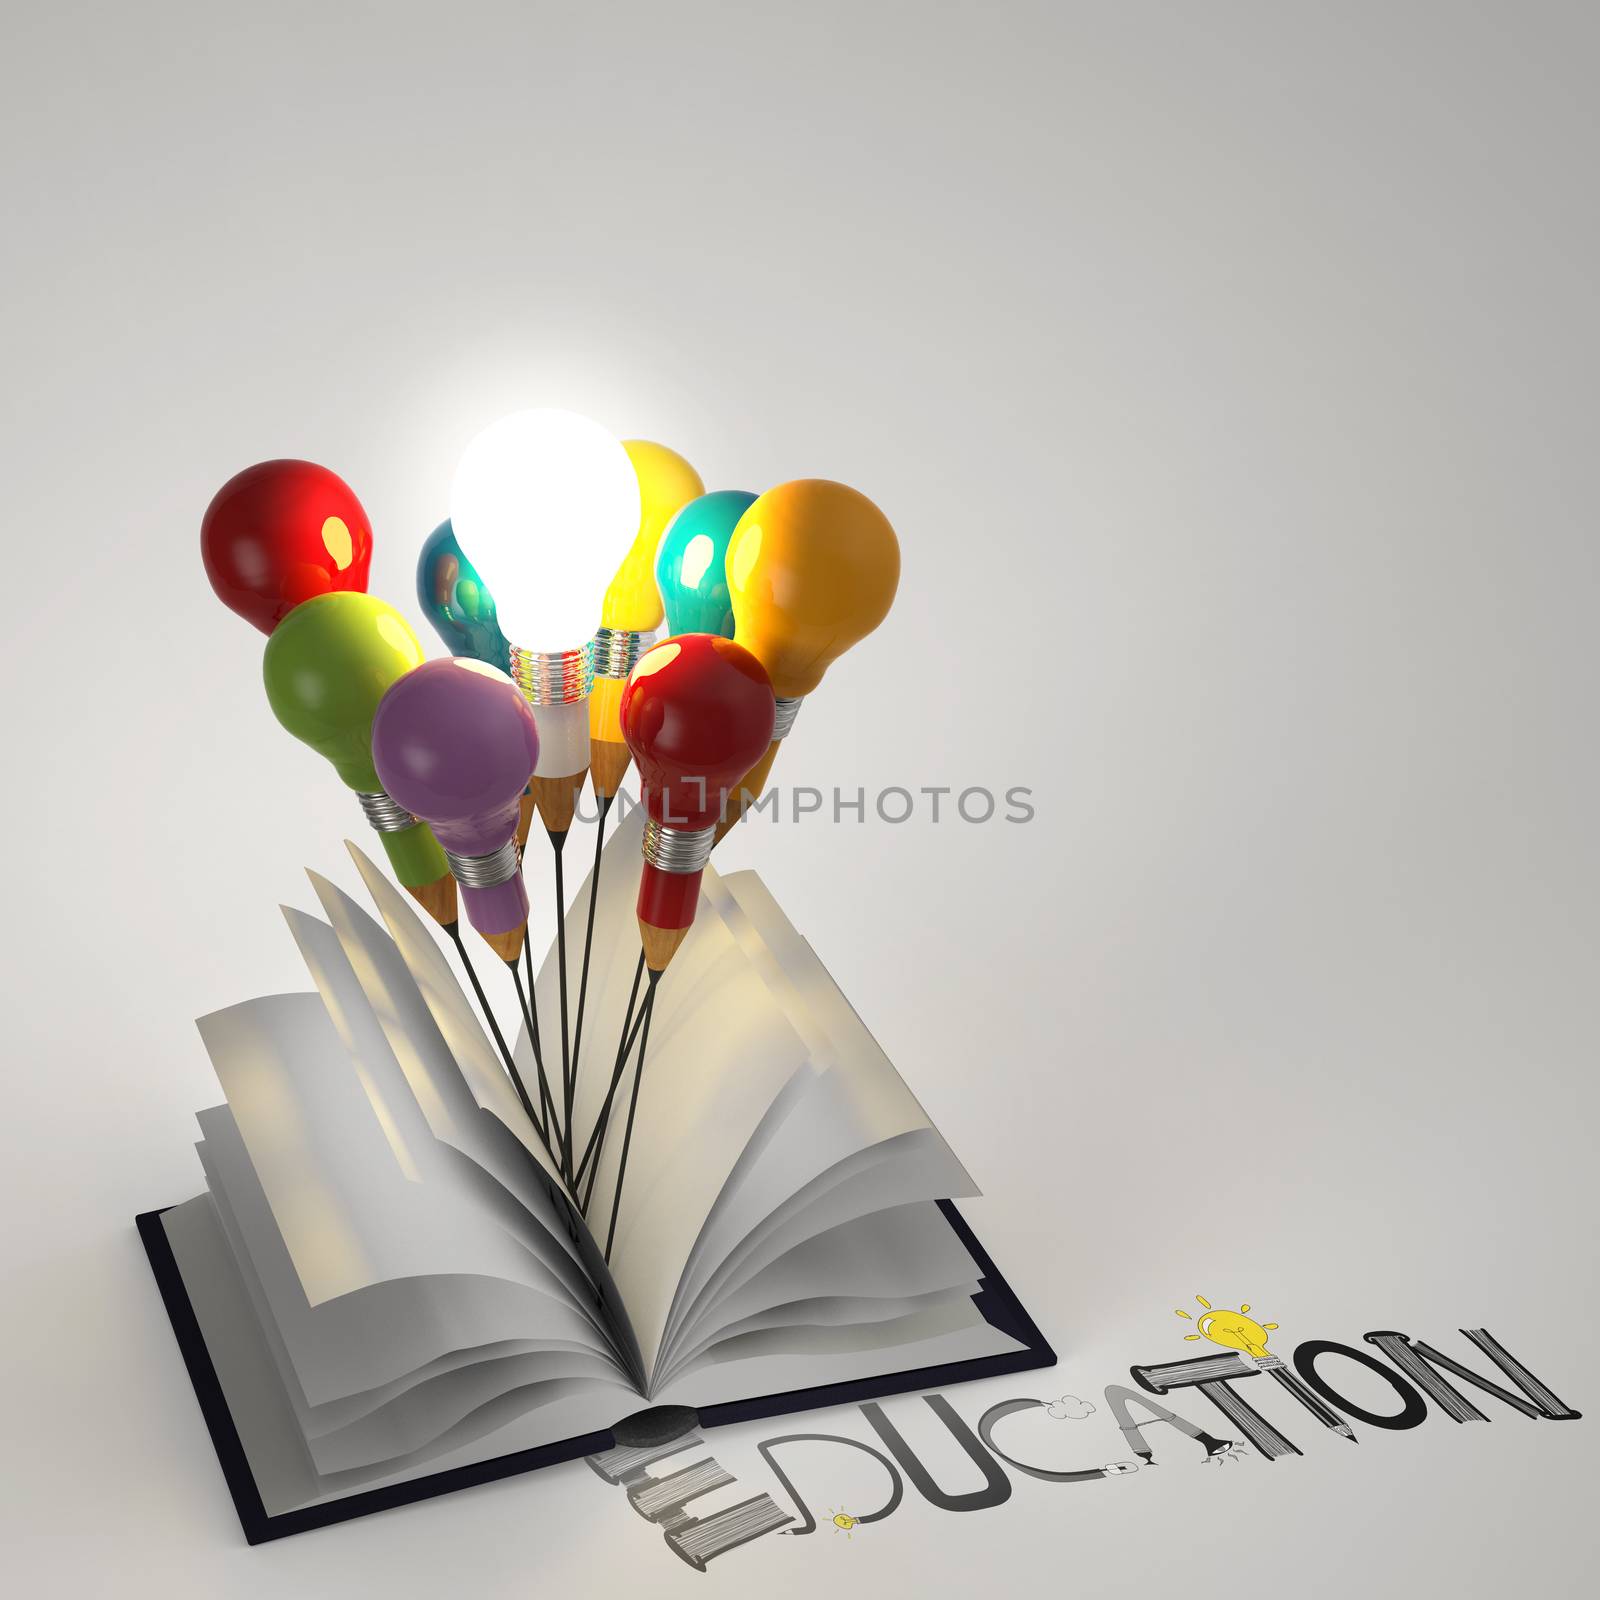 open book with pencil lightbulb 3d and design word EDUCATION as  by everythingpossible